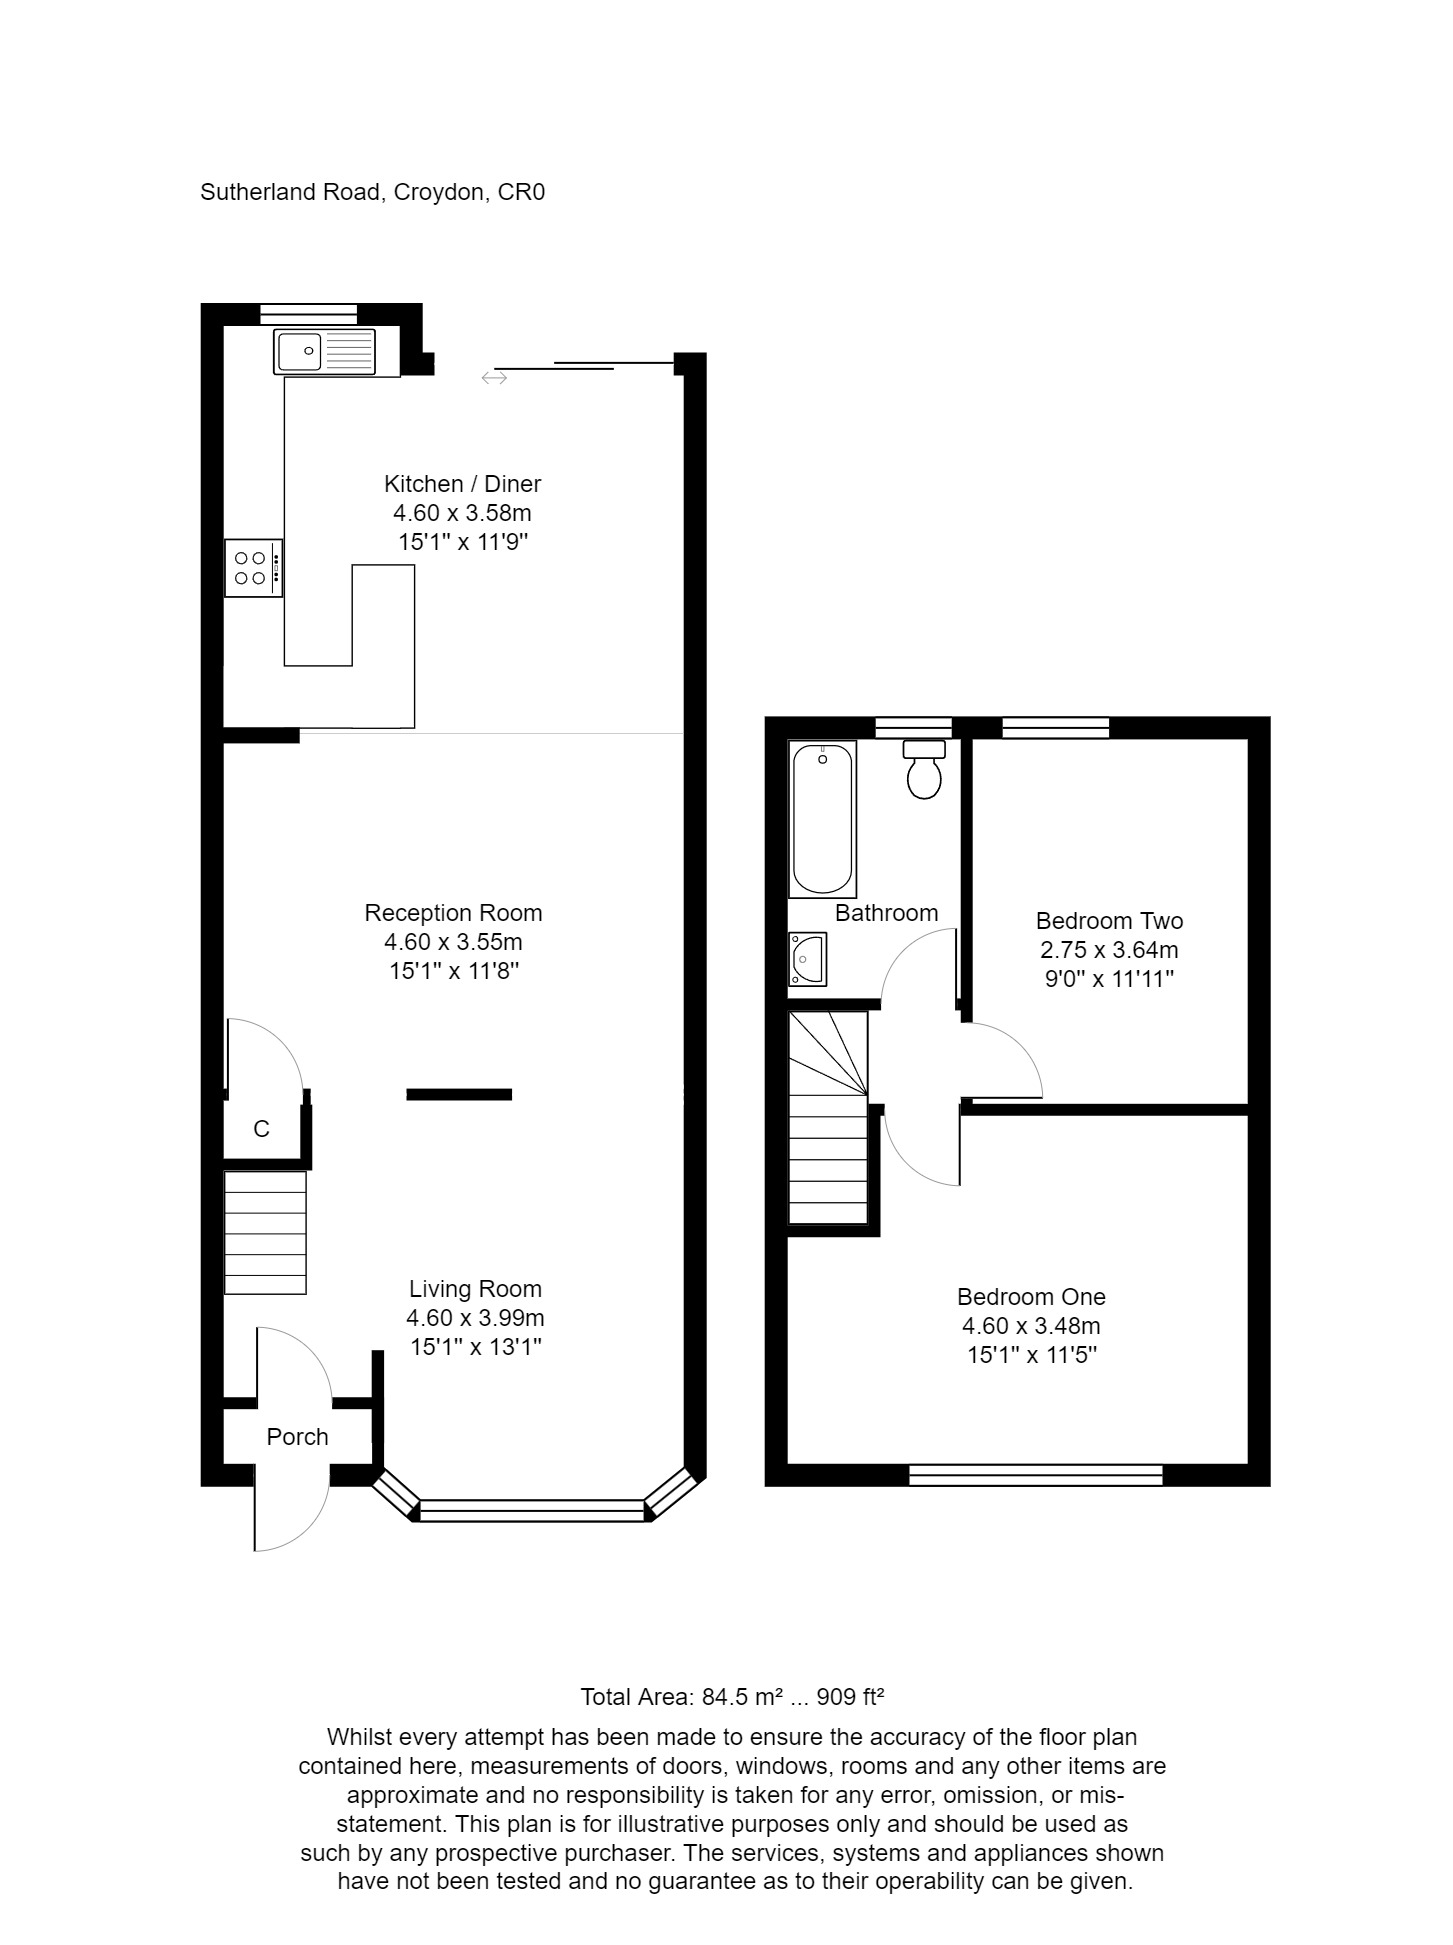 2 bed terraced house for sale in Sutherland Road, Croydon - Property floorplan